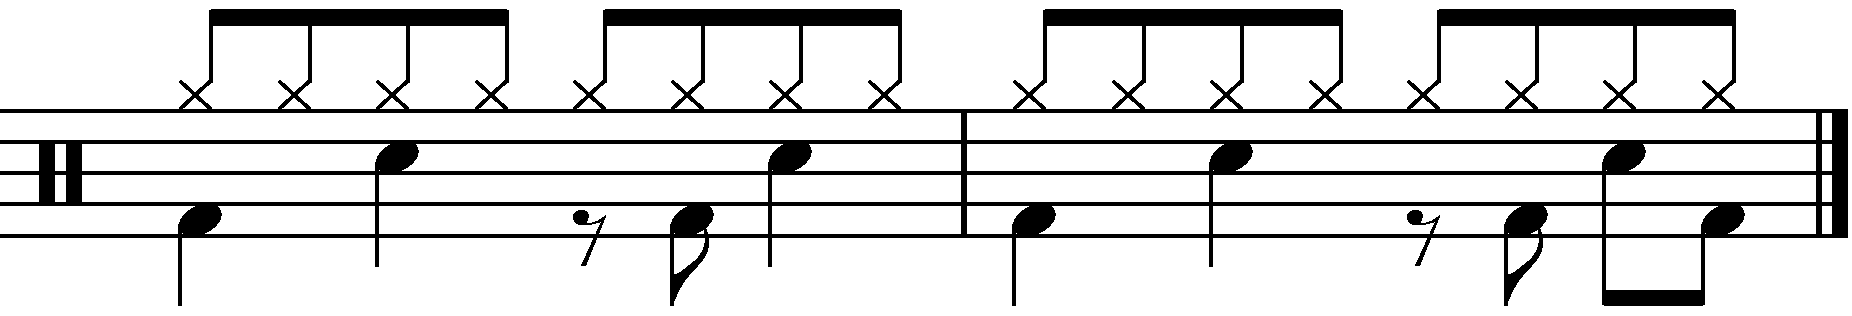 2 Bar Grooves - Example 3c